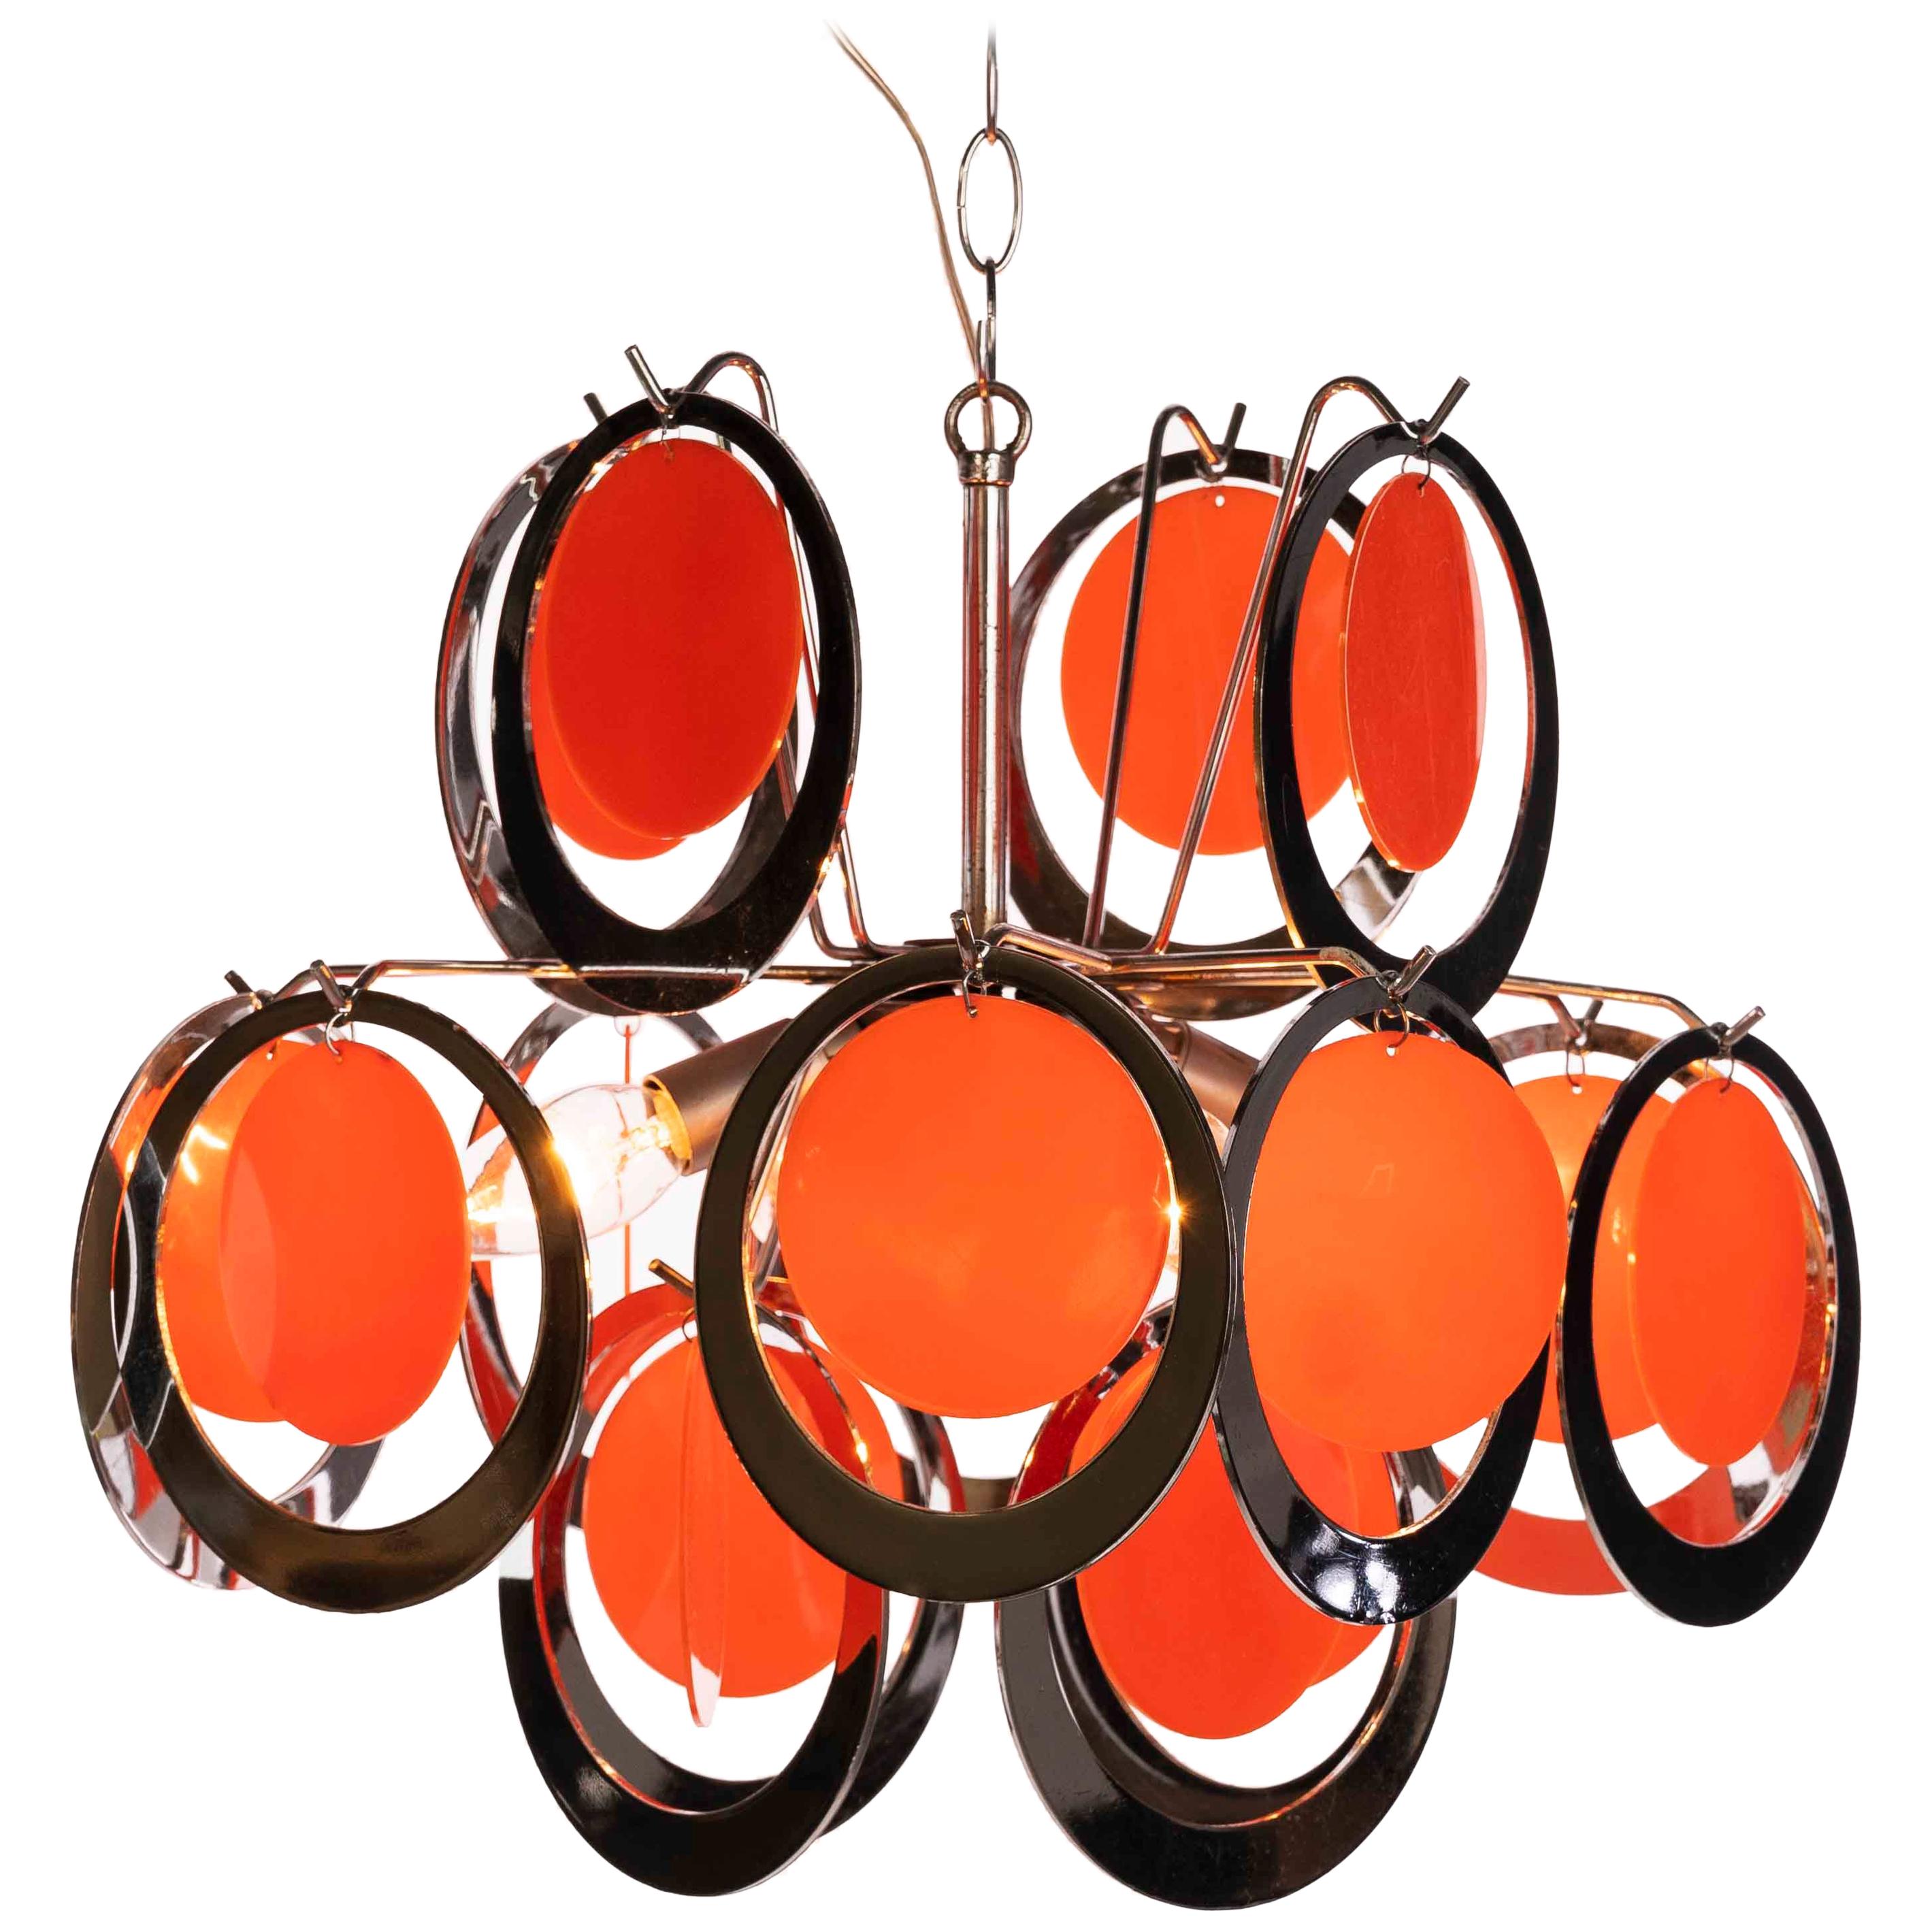 1970s Chromed Plastic Rings with Orange Plastic Circles For Sale